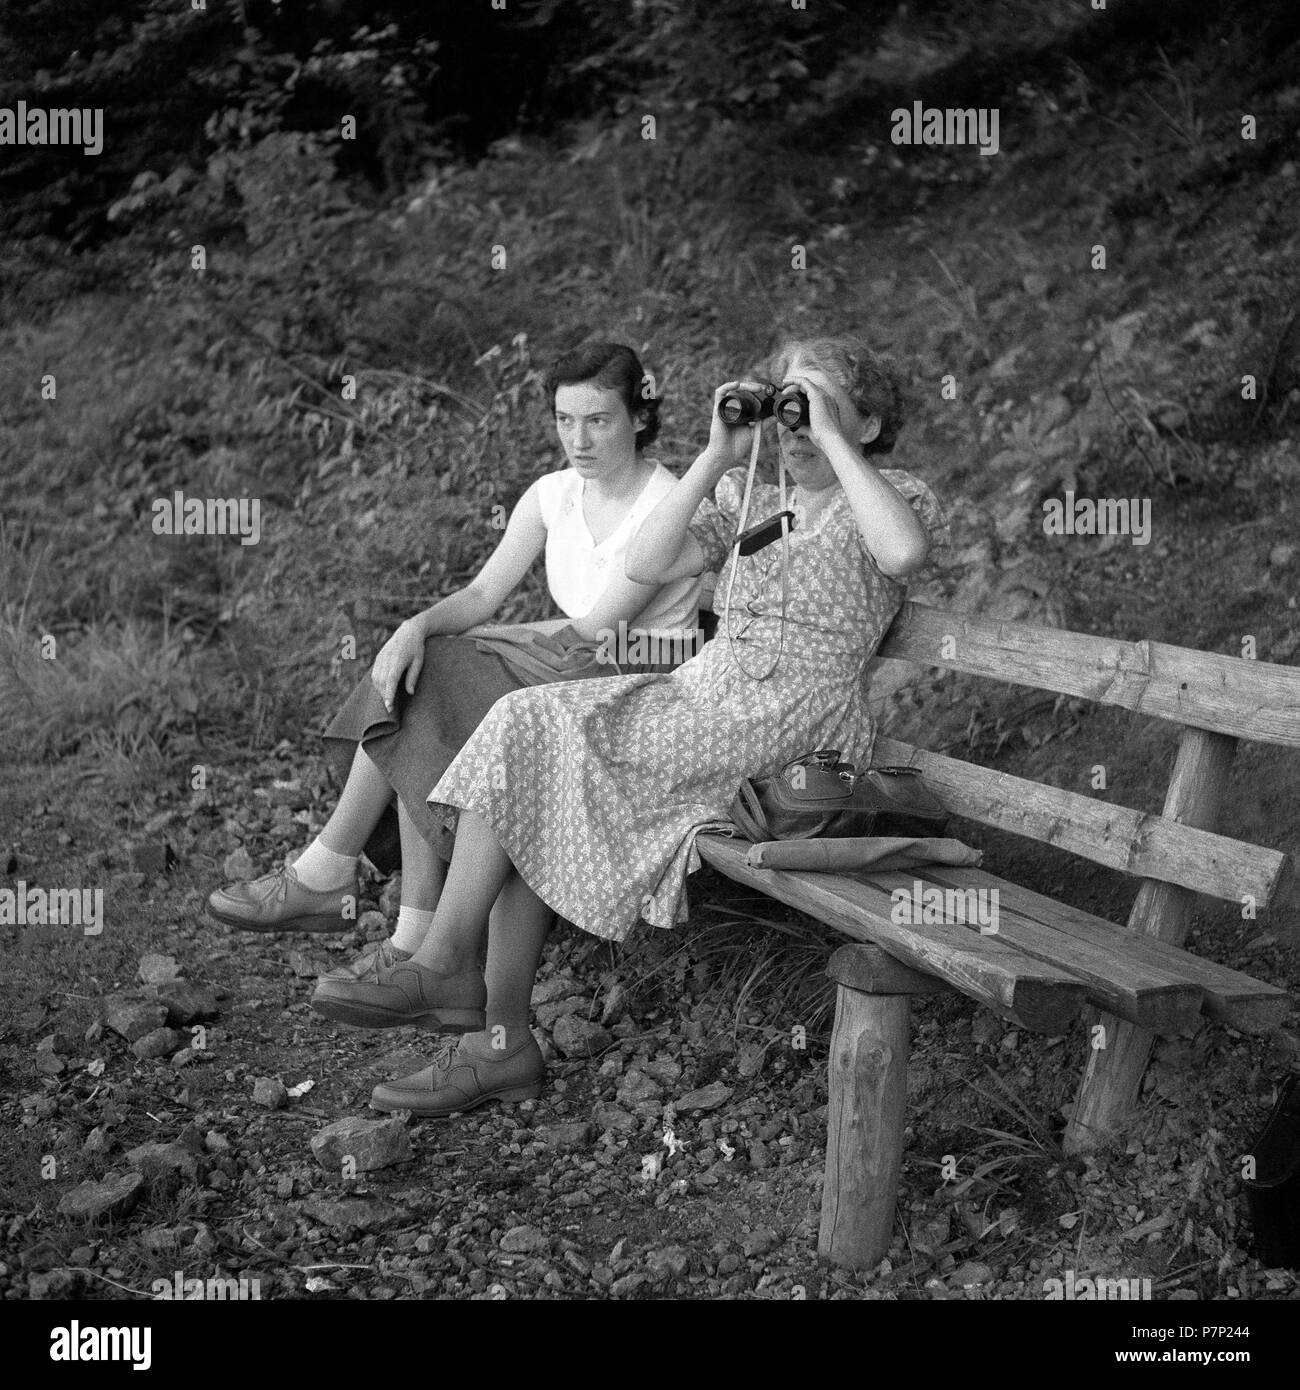 Two women are sitting on a bench and one of them is looking through binoculars, ca. 1945 to 1955, near Freiburg, Germany Stock Photo